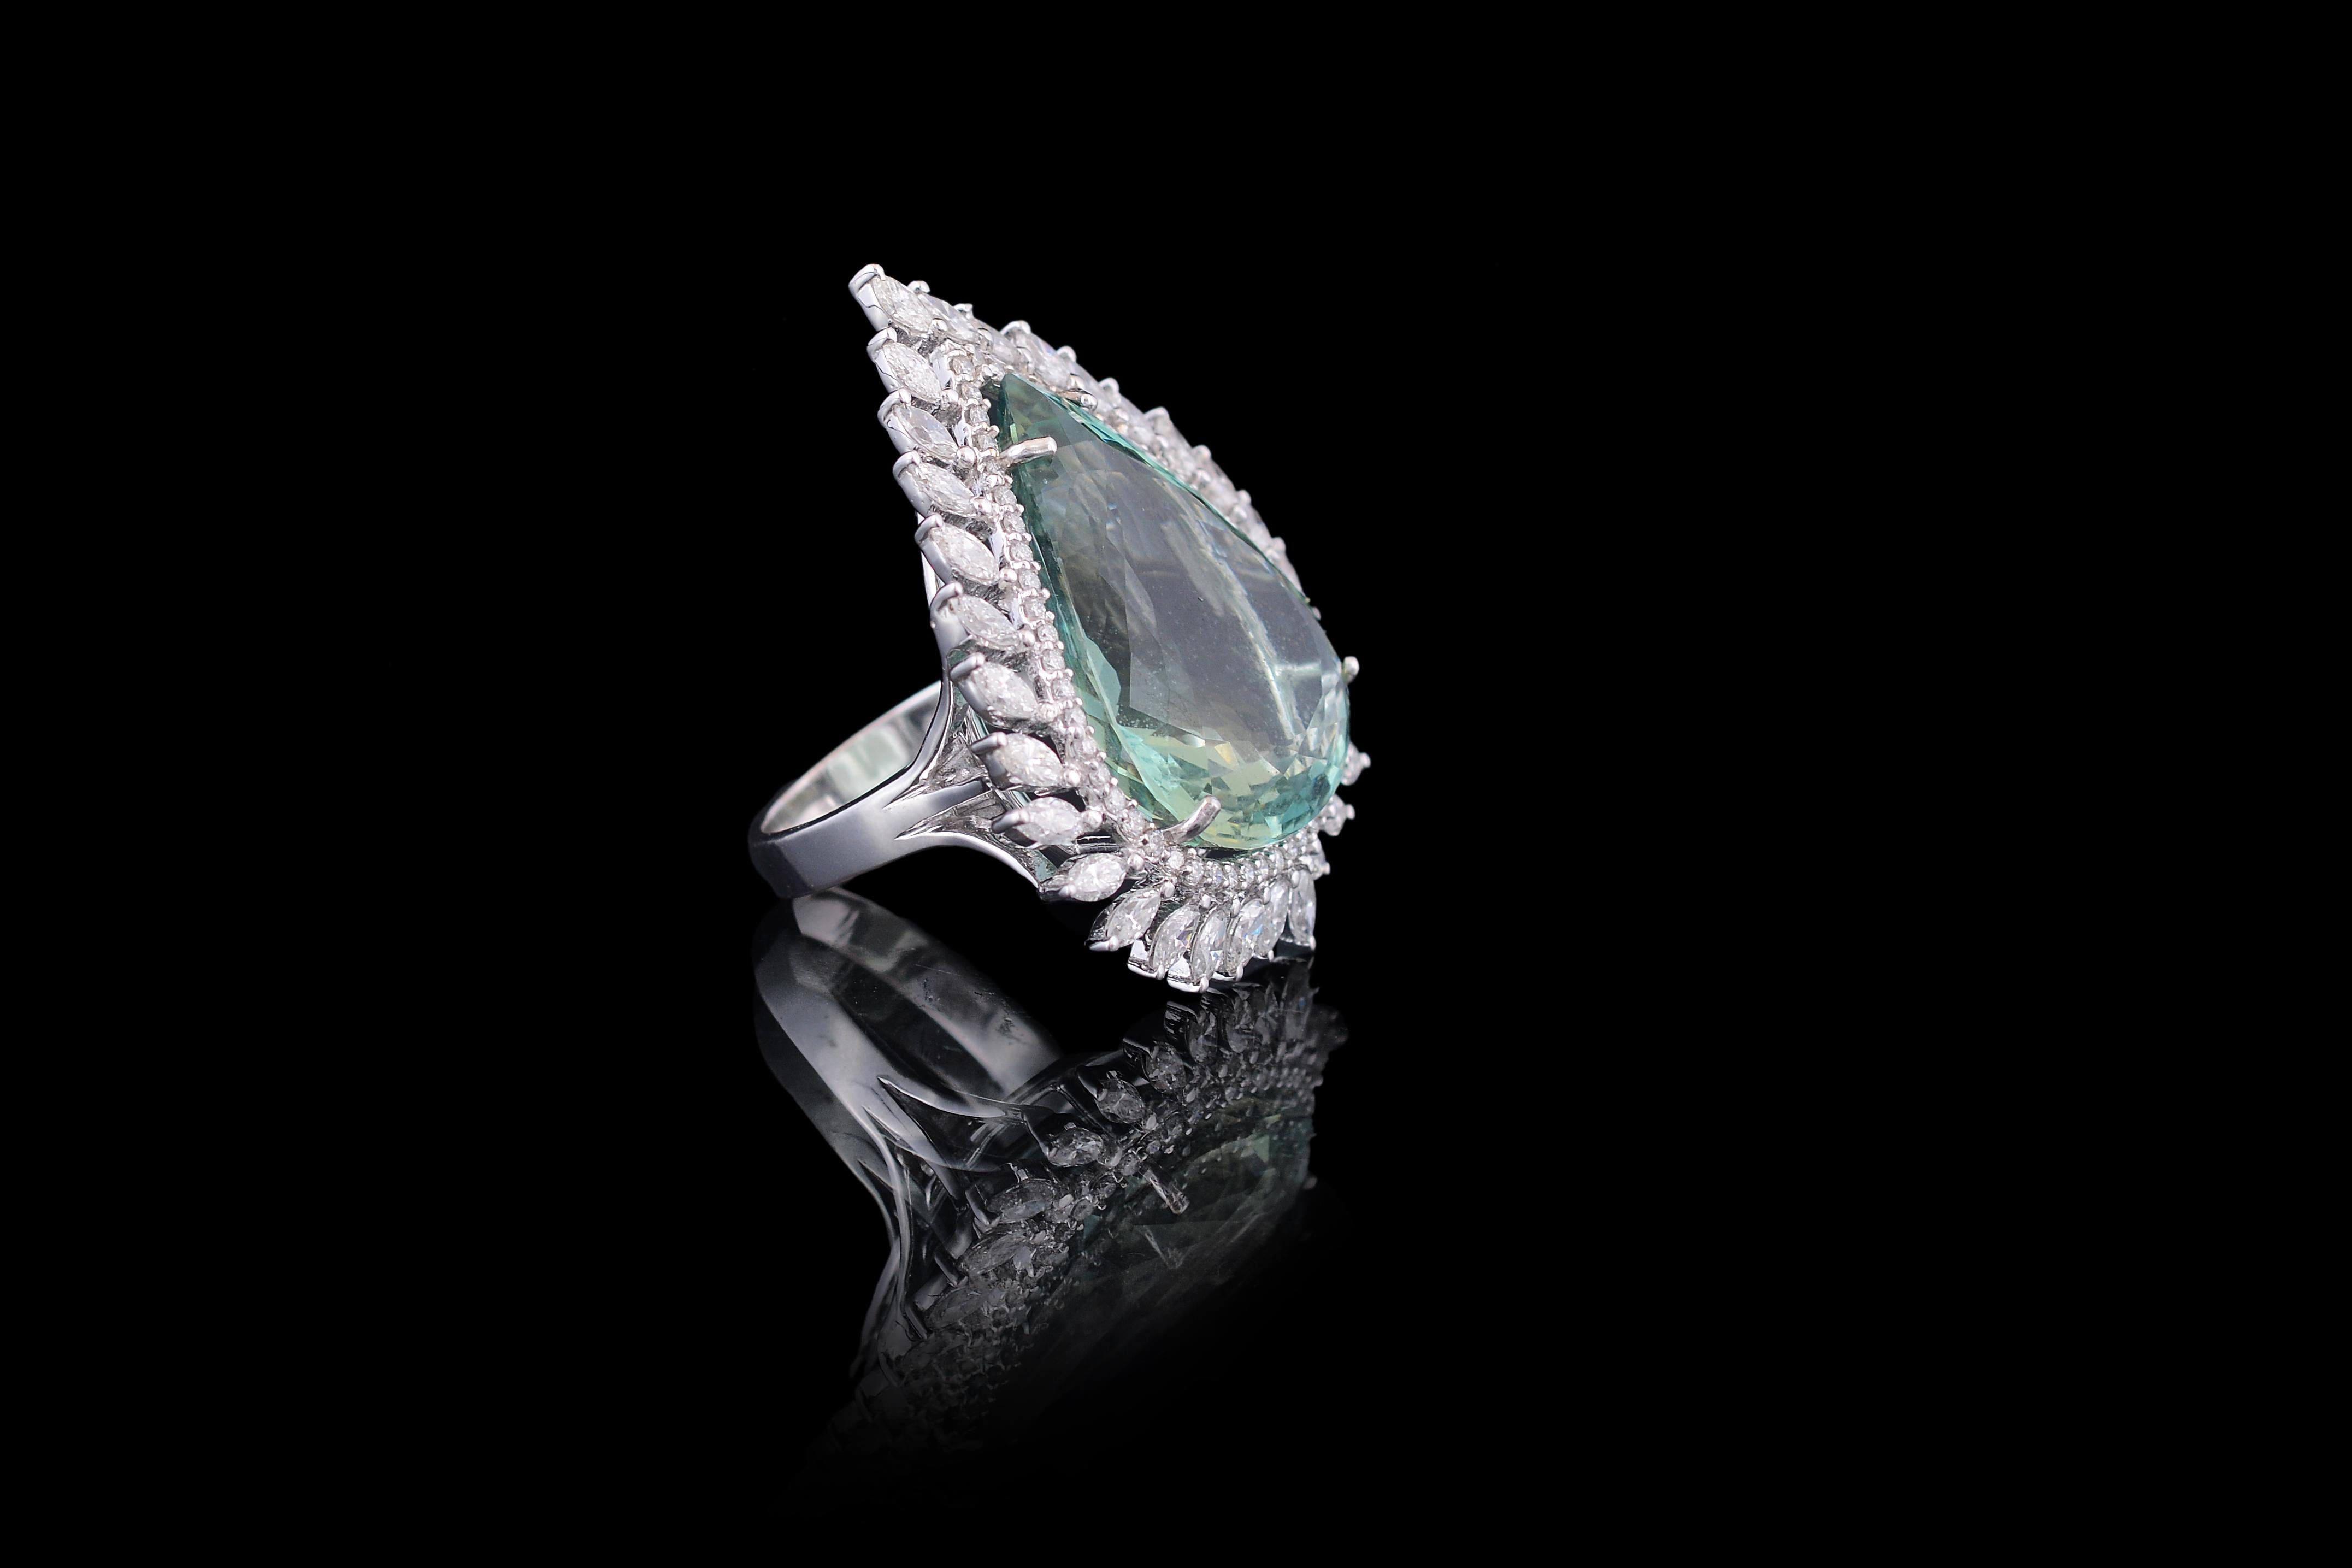 A very gorgeous and chic pear shaped, green aquamarine ring set with marquise shaped diamond in 18K white gold. The weight of the aquamarine is 22.27 carats and the weight of the marquise diamonds is 1.77 carats. The green shade of the aquamarine is